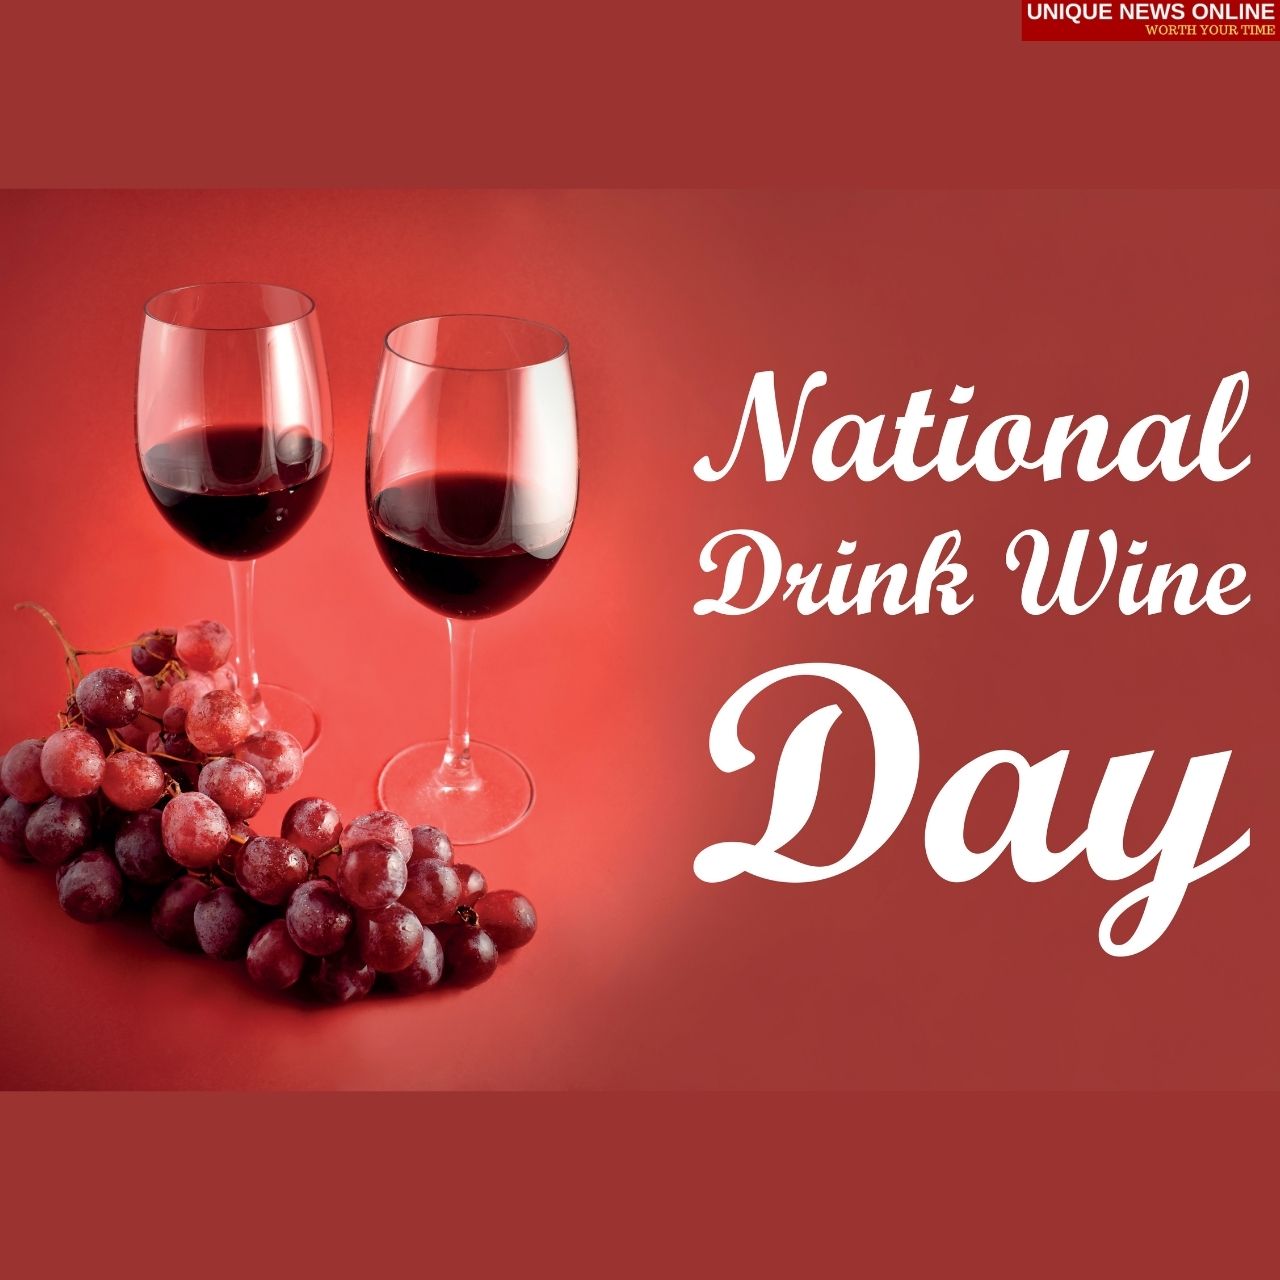 National Drink Wine Day (USA) 2022 Instagram Captions, Memes, HD Images